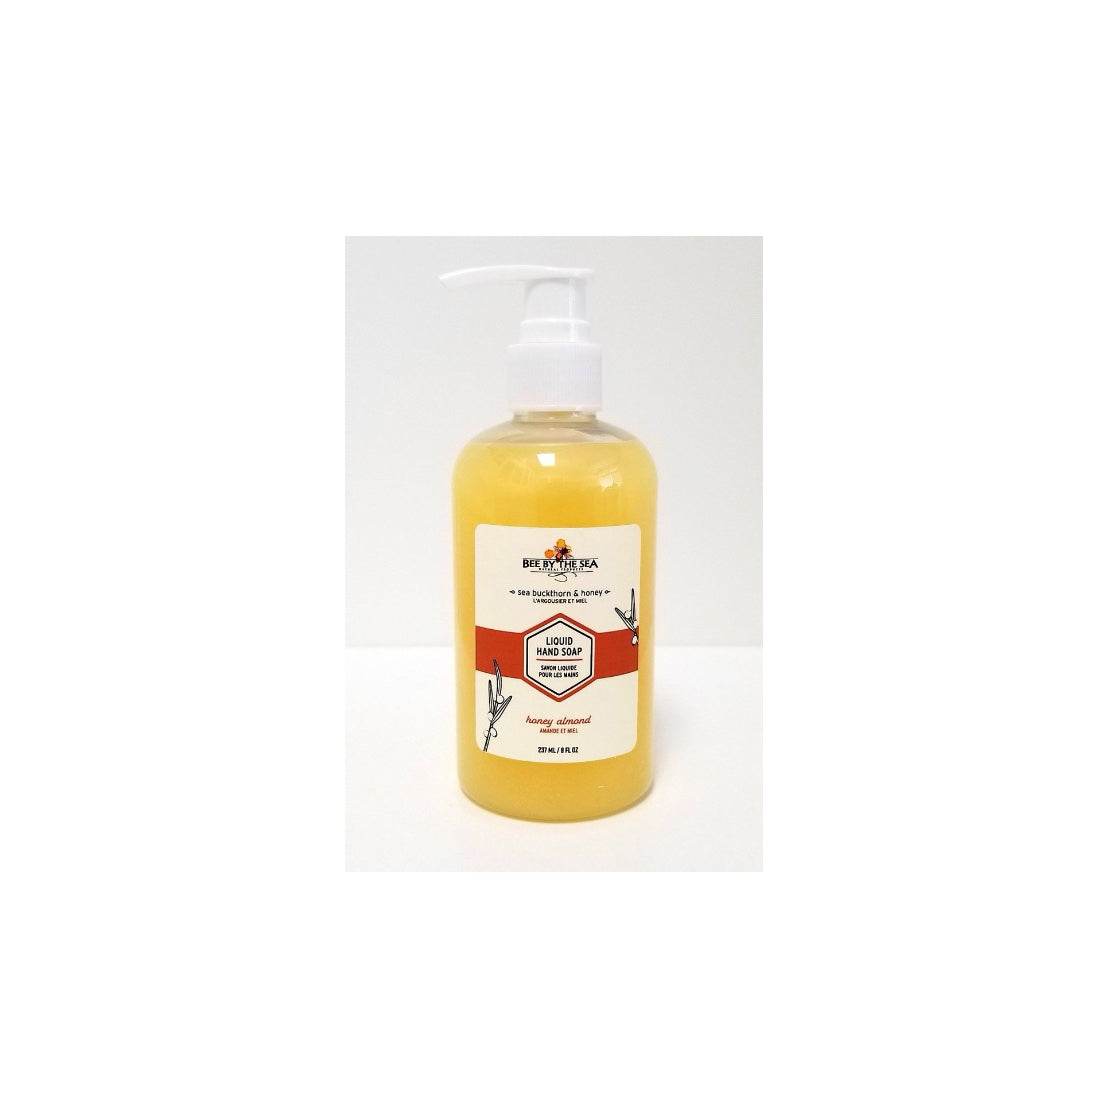 Bee By the Sea Liquid Hand Soap Almond